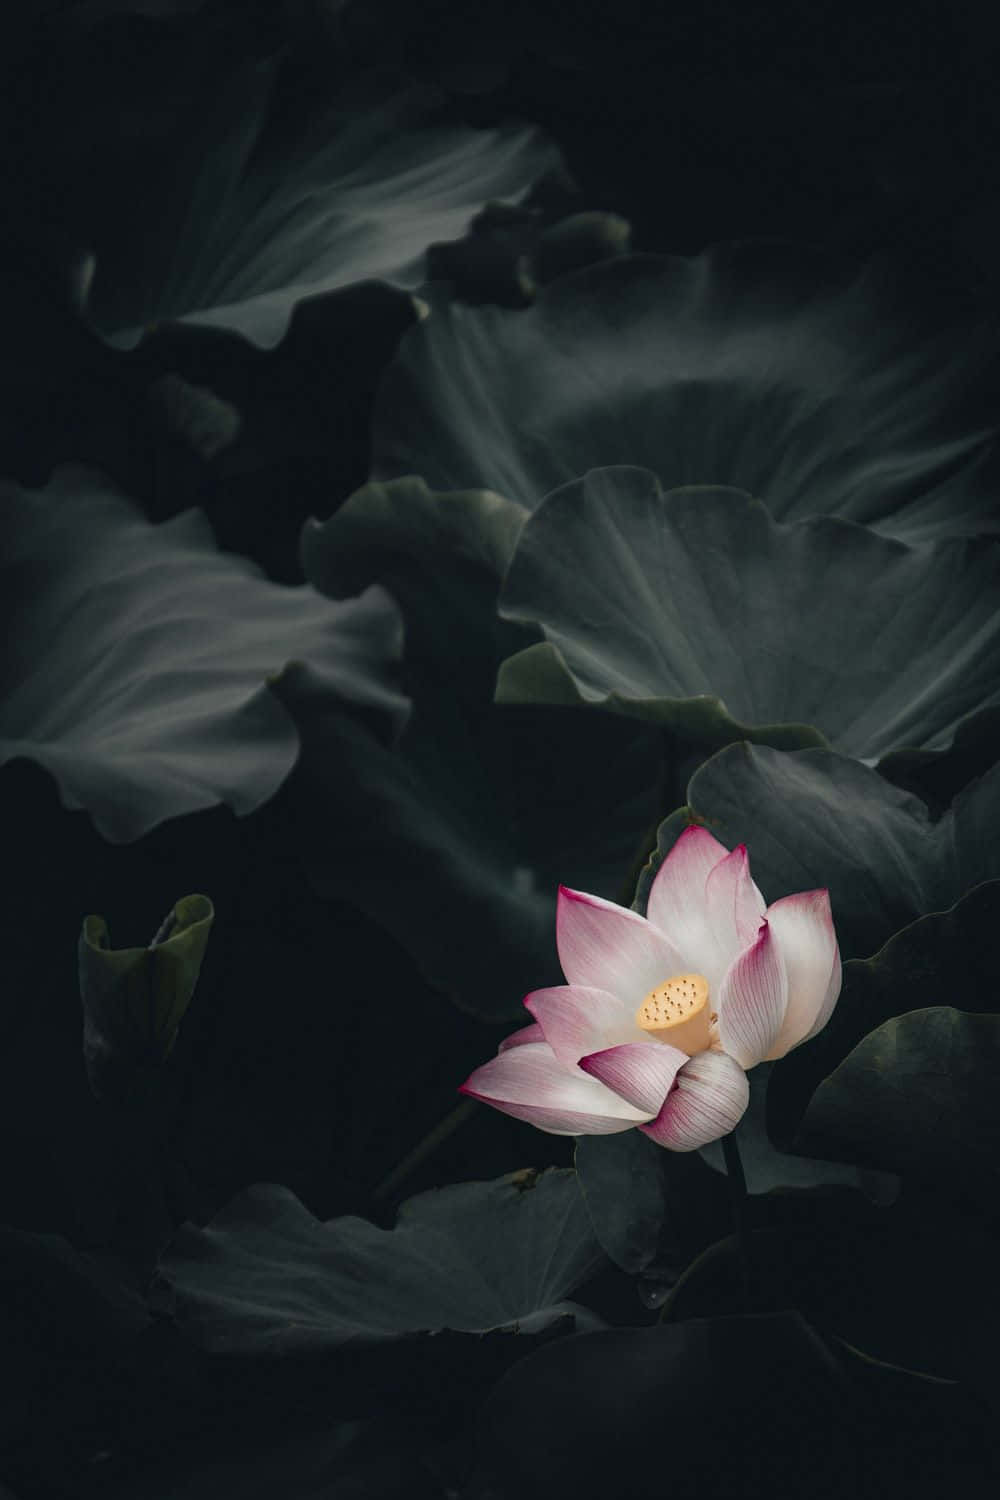 A Water Lily Lotus Flower Blooming in a Pond